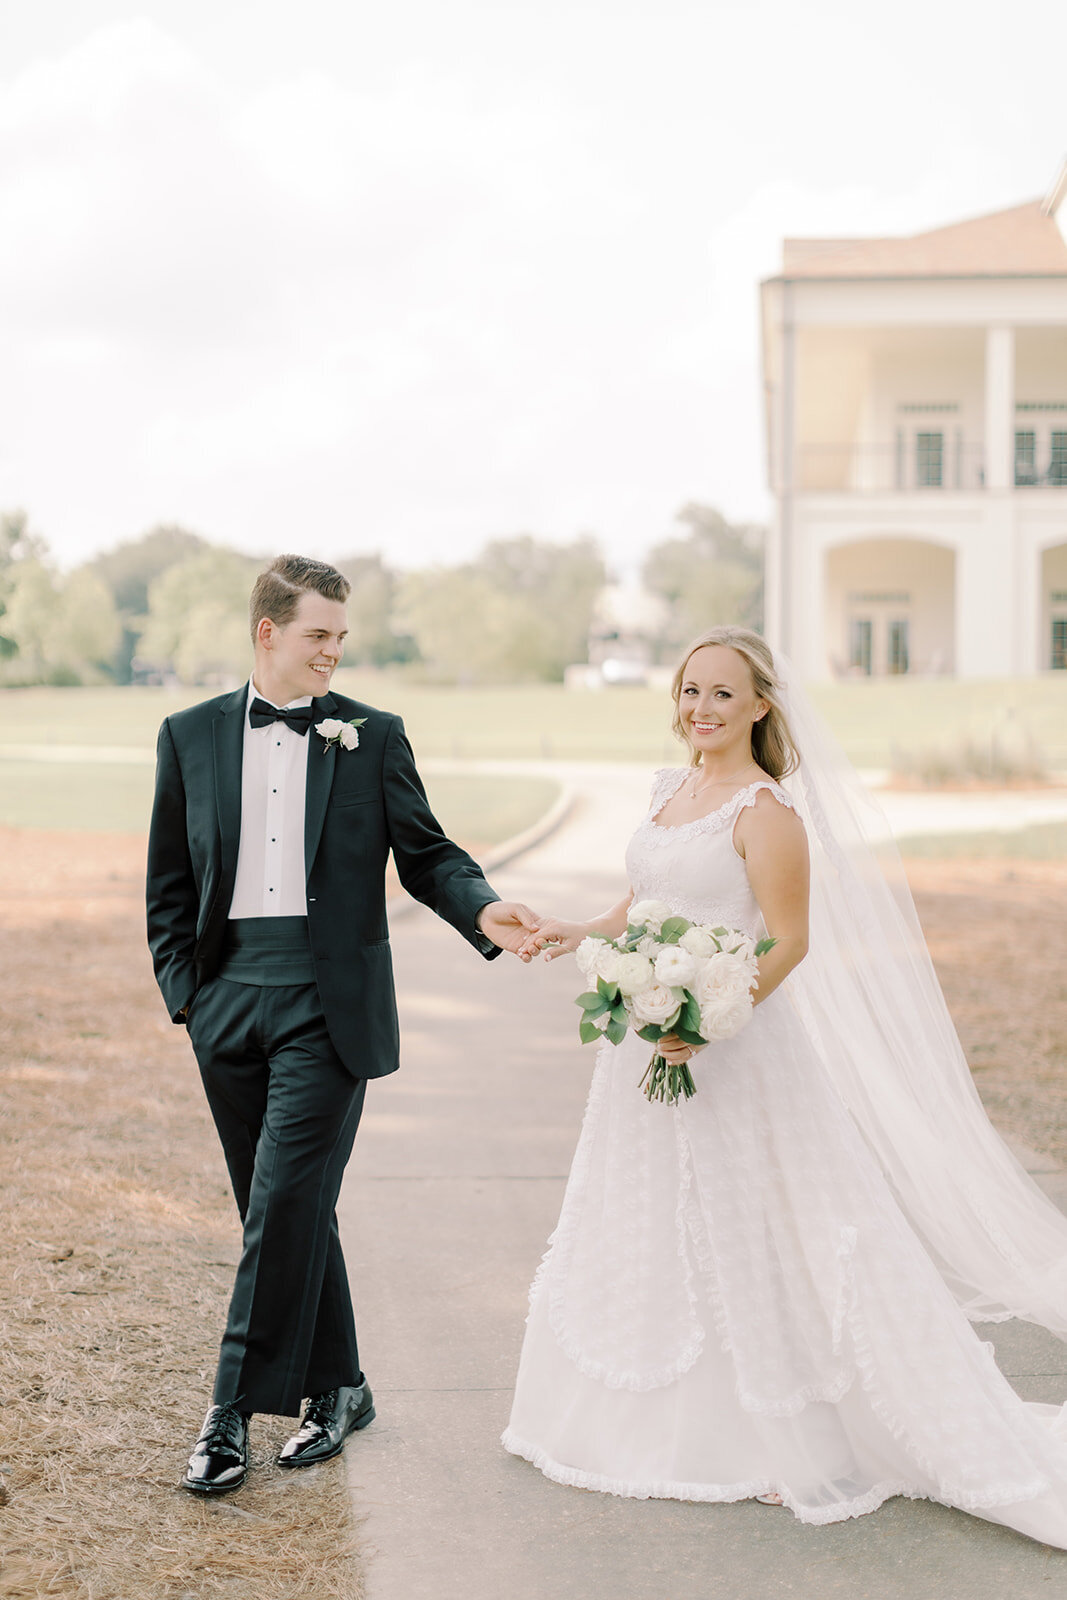 Shea-Gibson-Mississippi-Photographer-morell wedding sp_-45